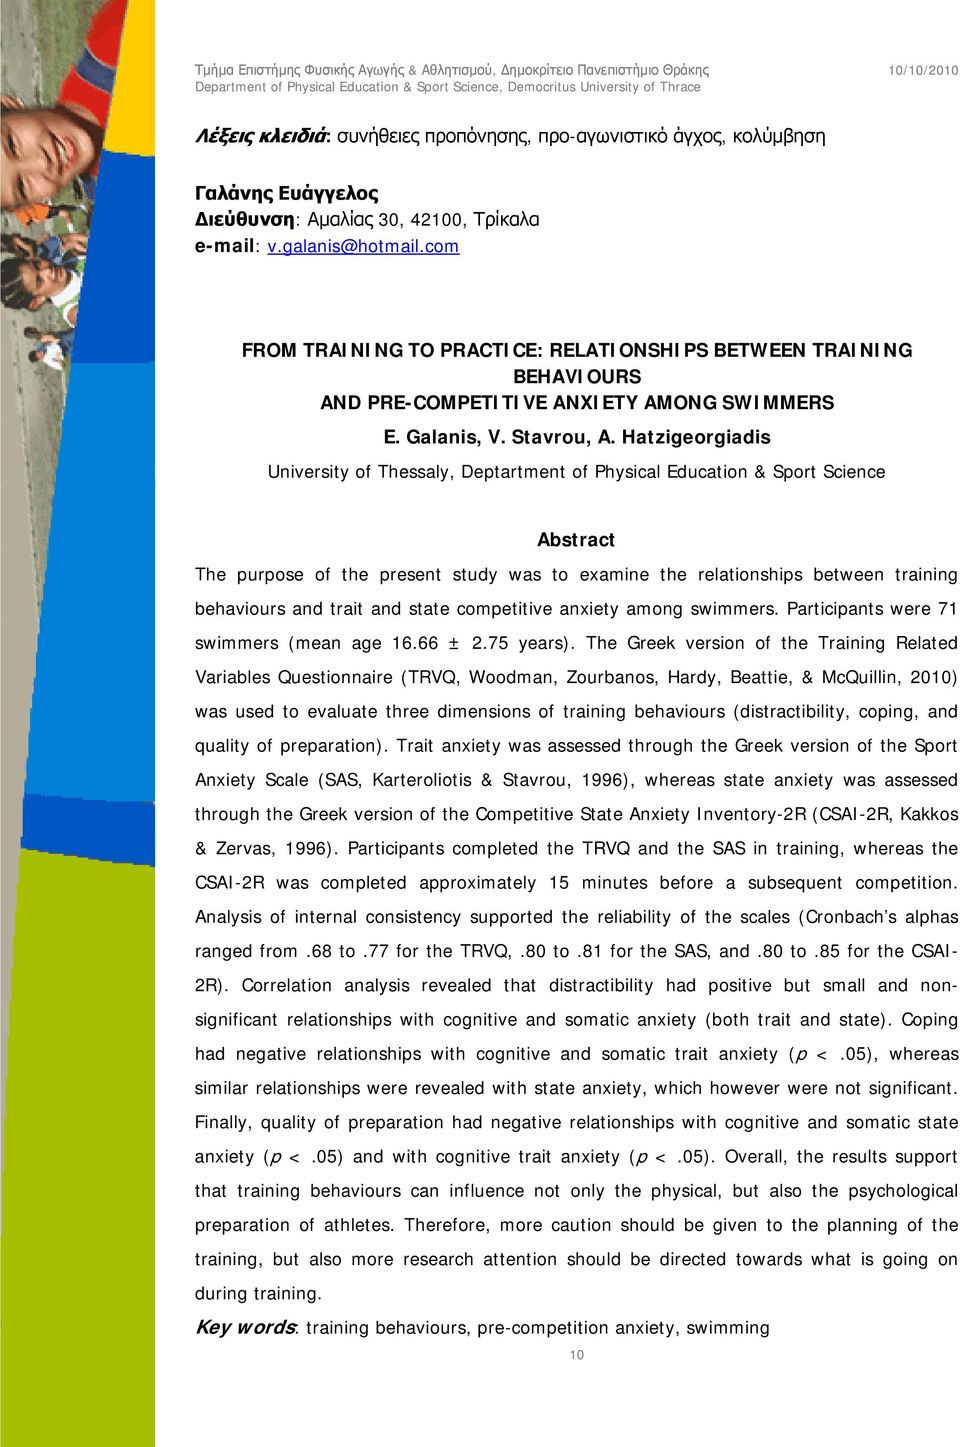 Hatzigeorgiadis University of Thessaly, Deptartment of Physical Education & Sport Science Abstract The purpose of the present study was to examine the relationships between training behaviours and